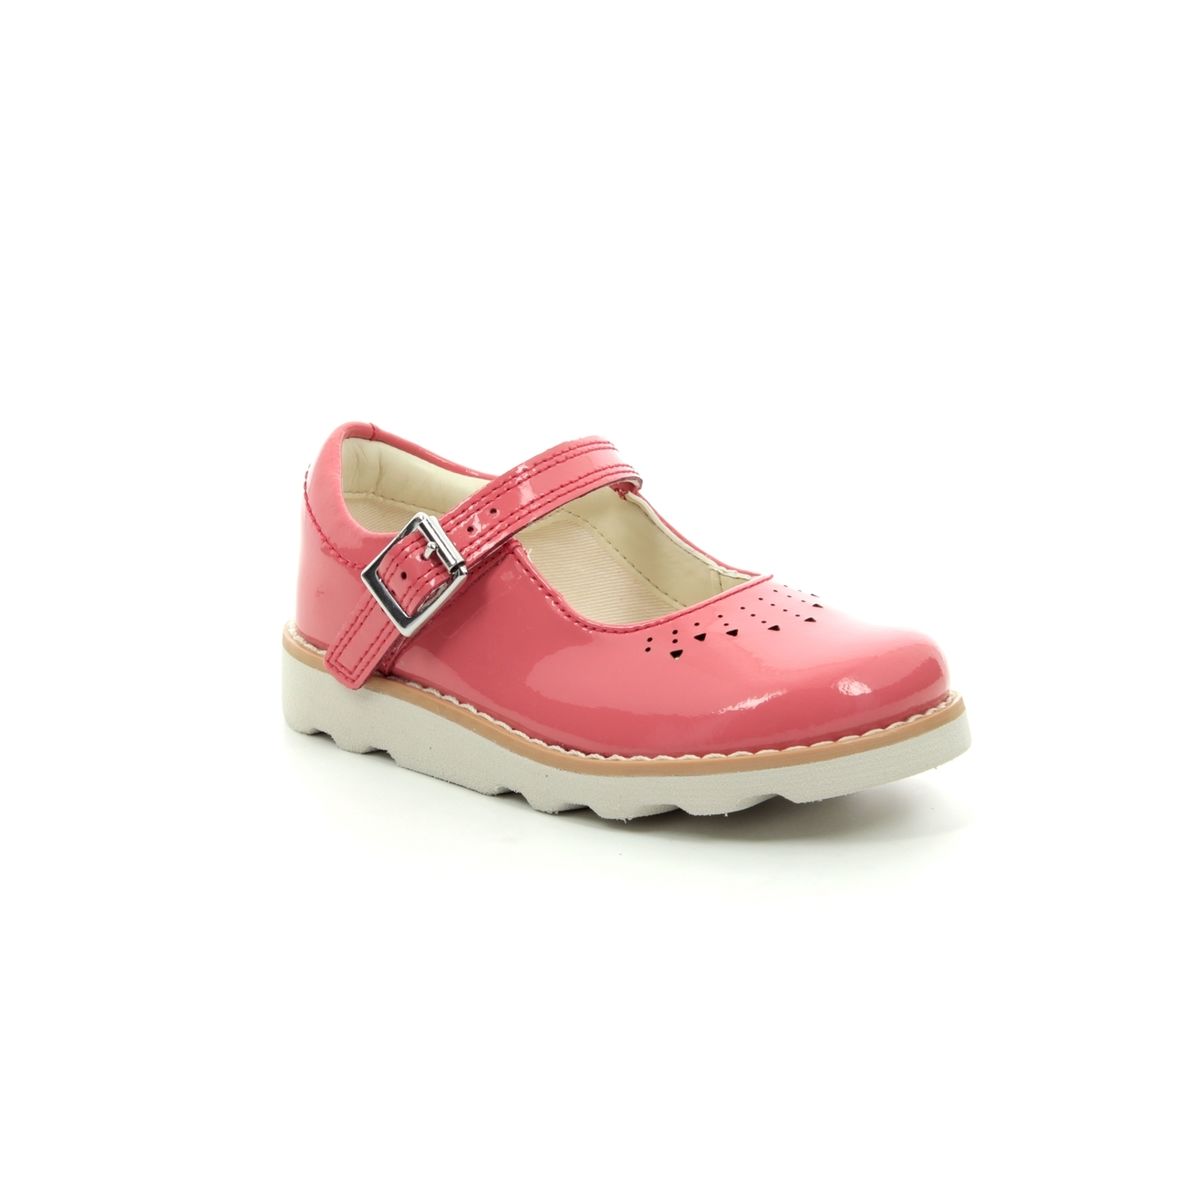 clarks jump shoes